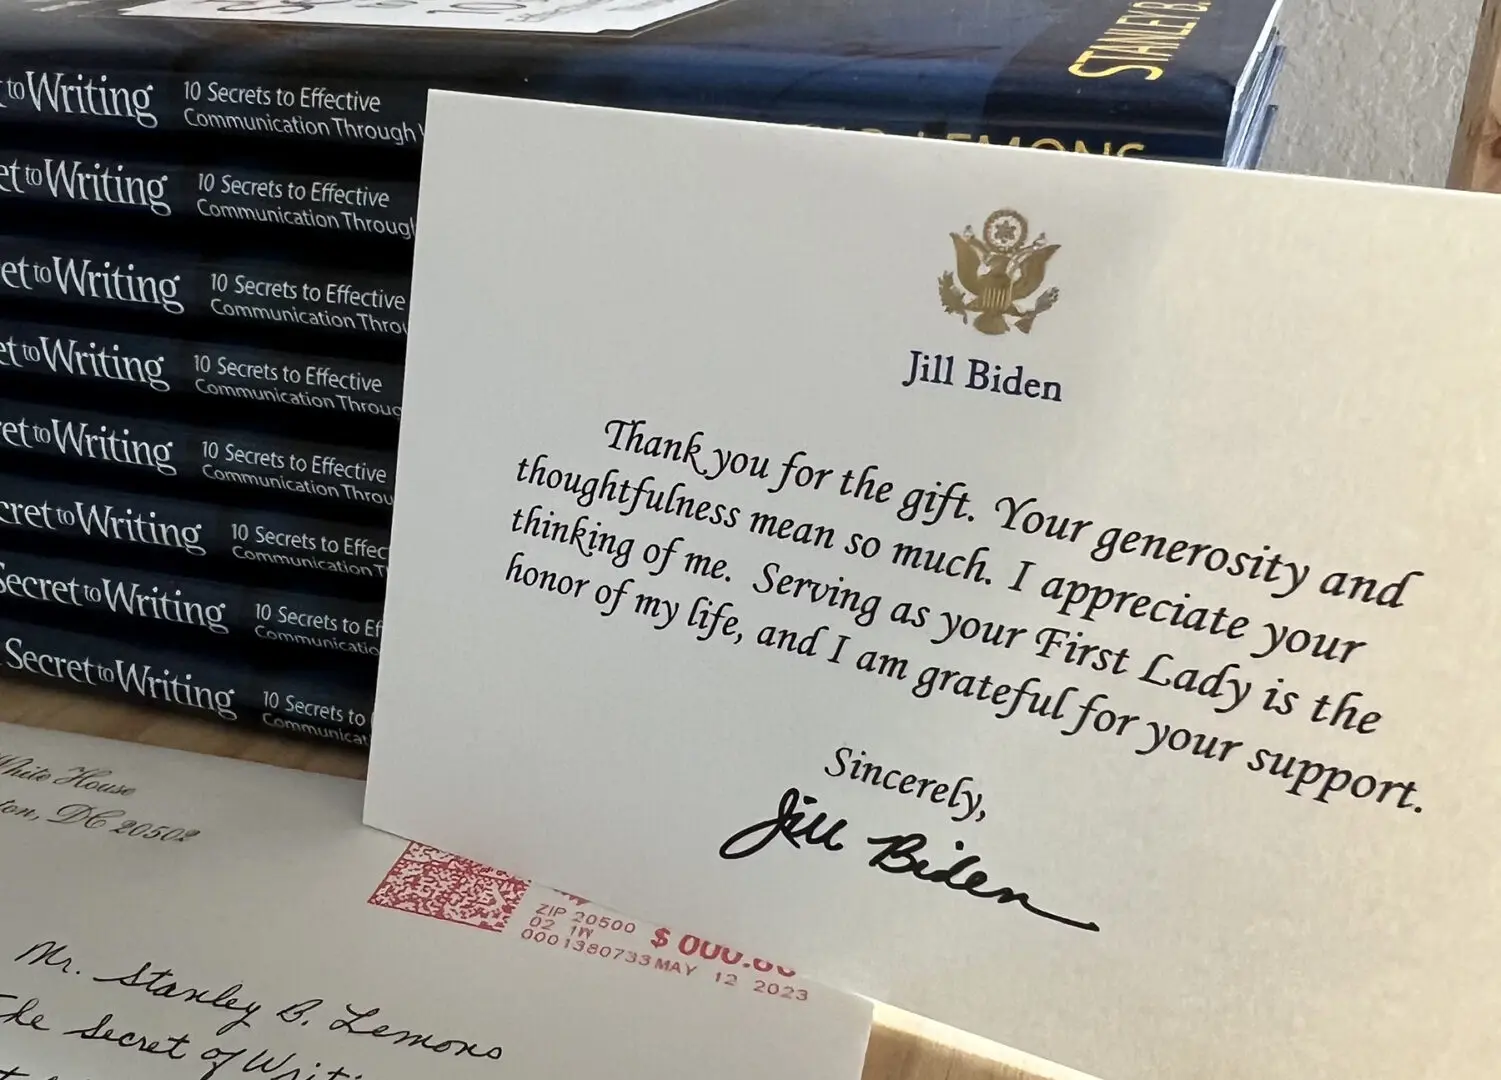 A thank you note from the president of the united states.